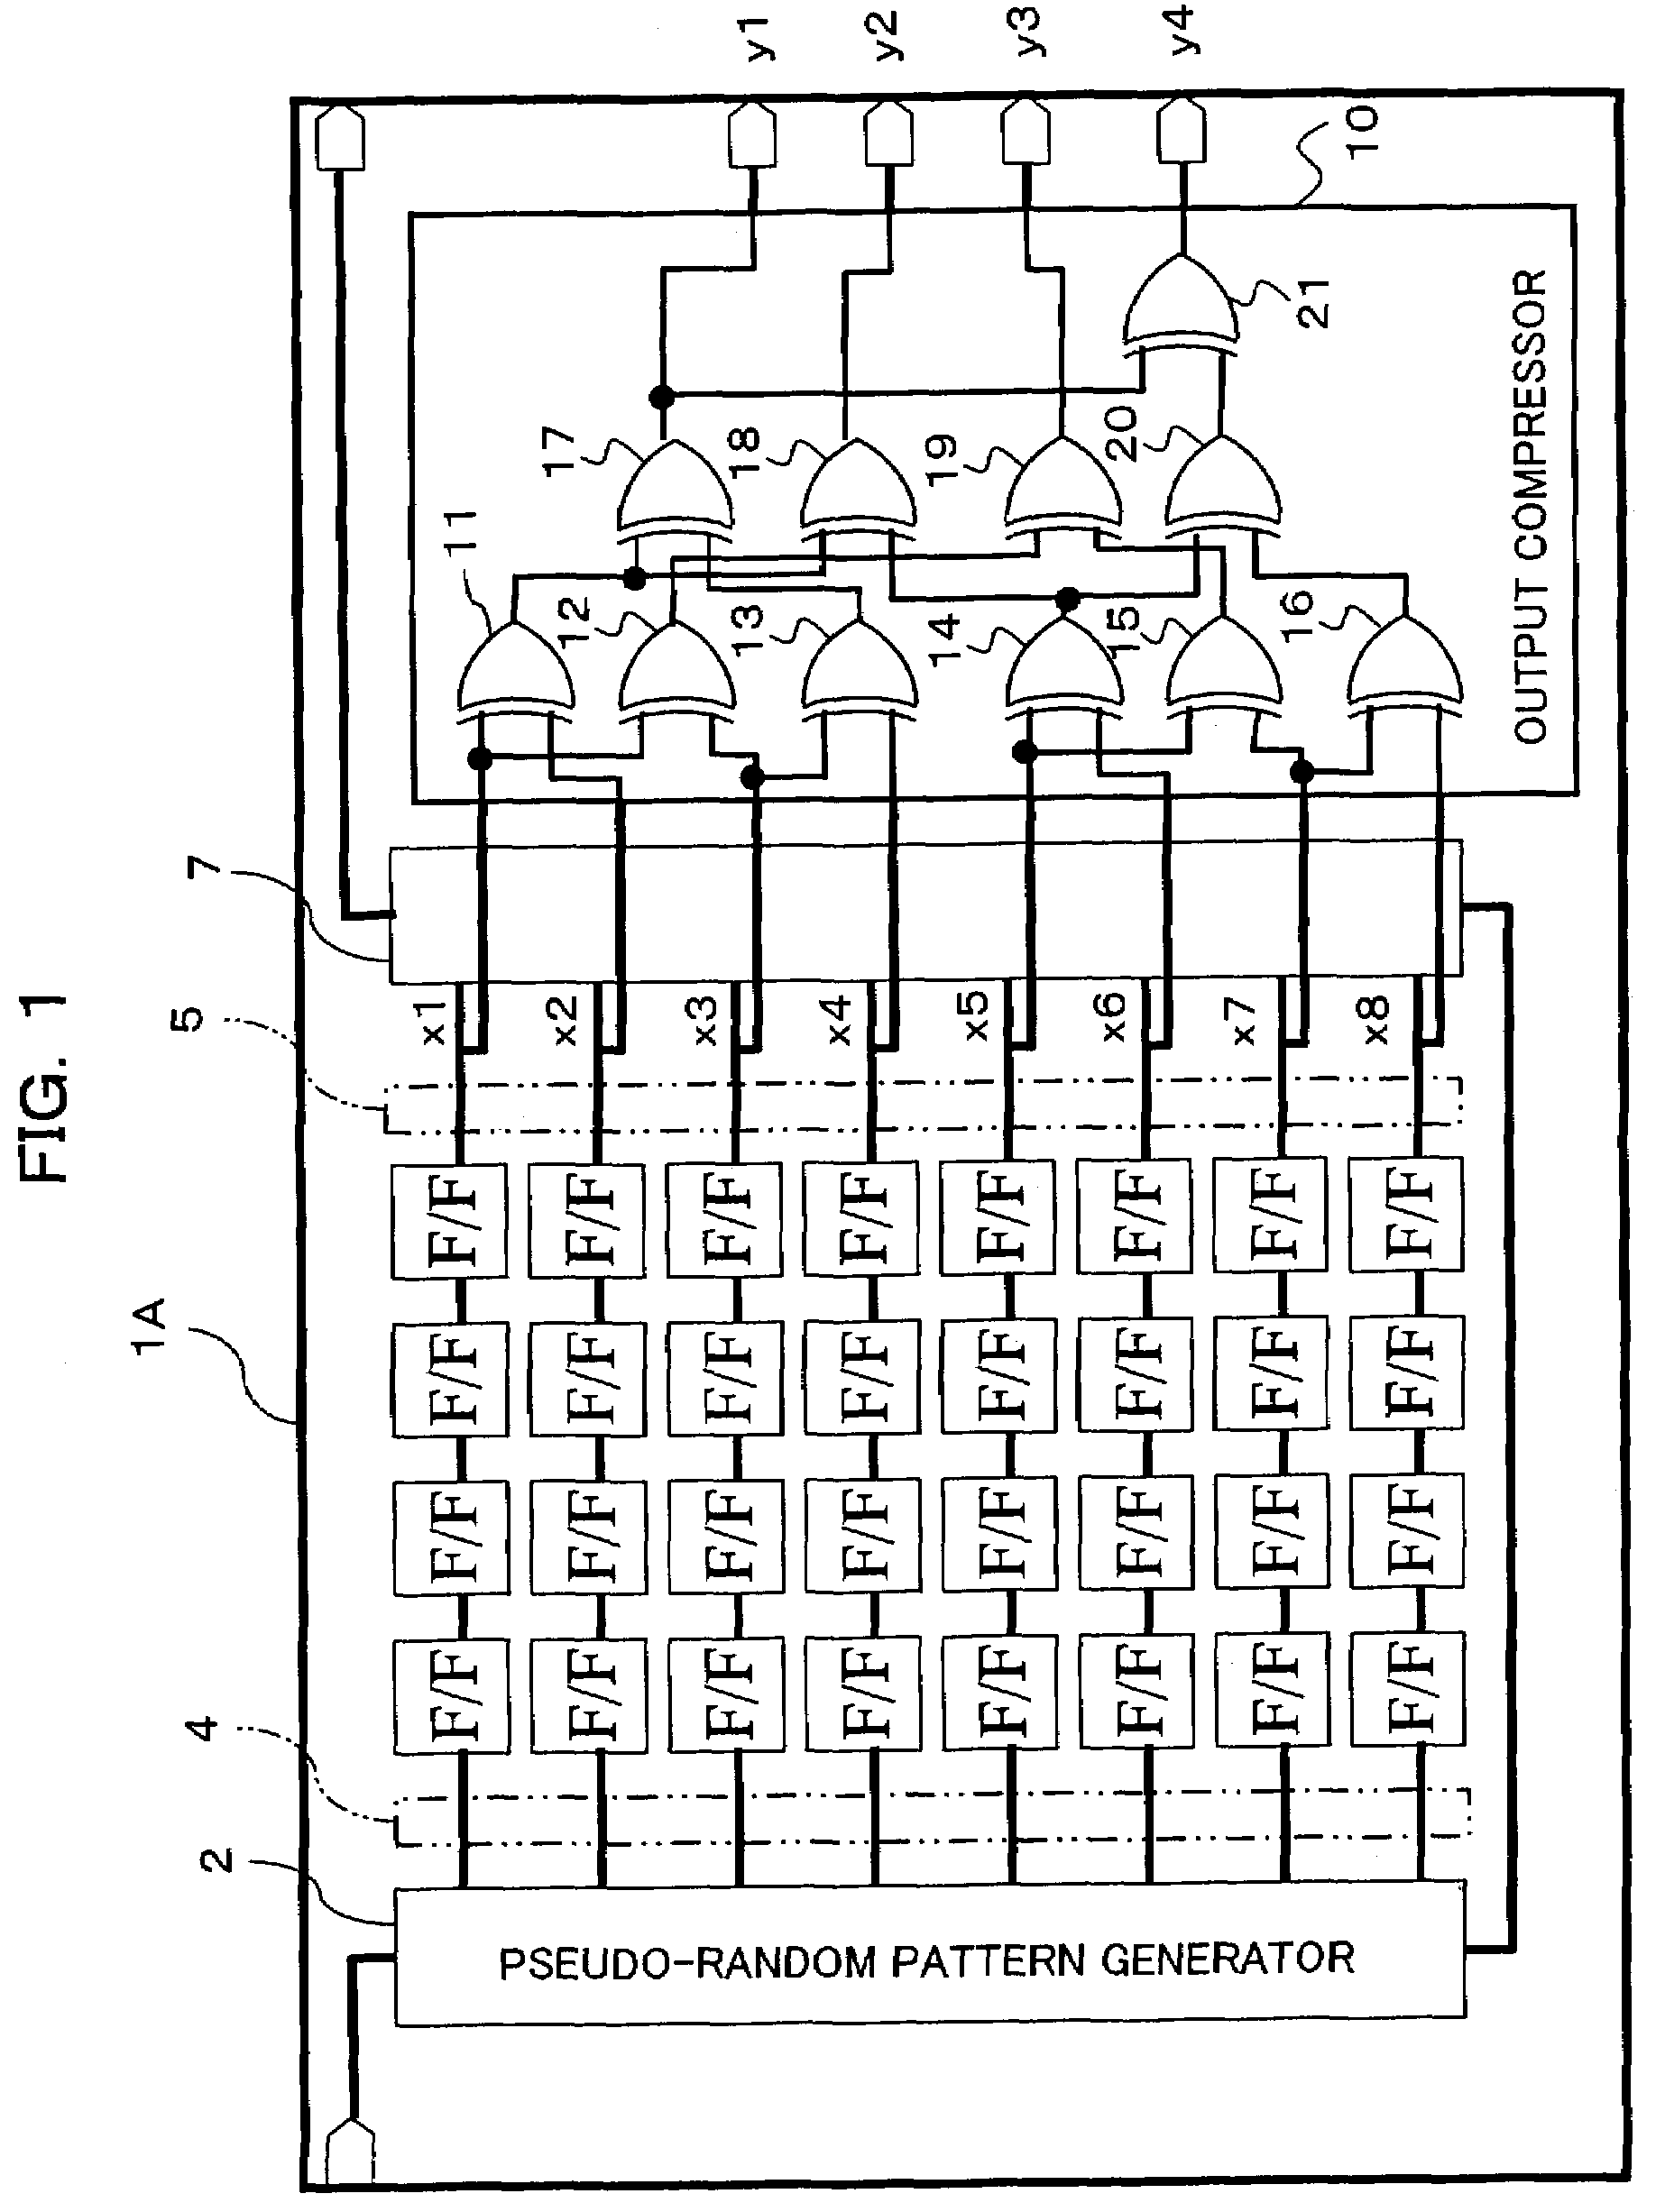 Apparatus and method for diagnosing integrated circuit